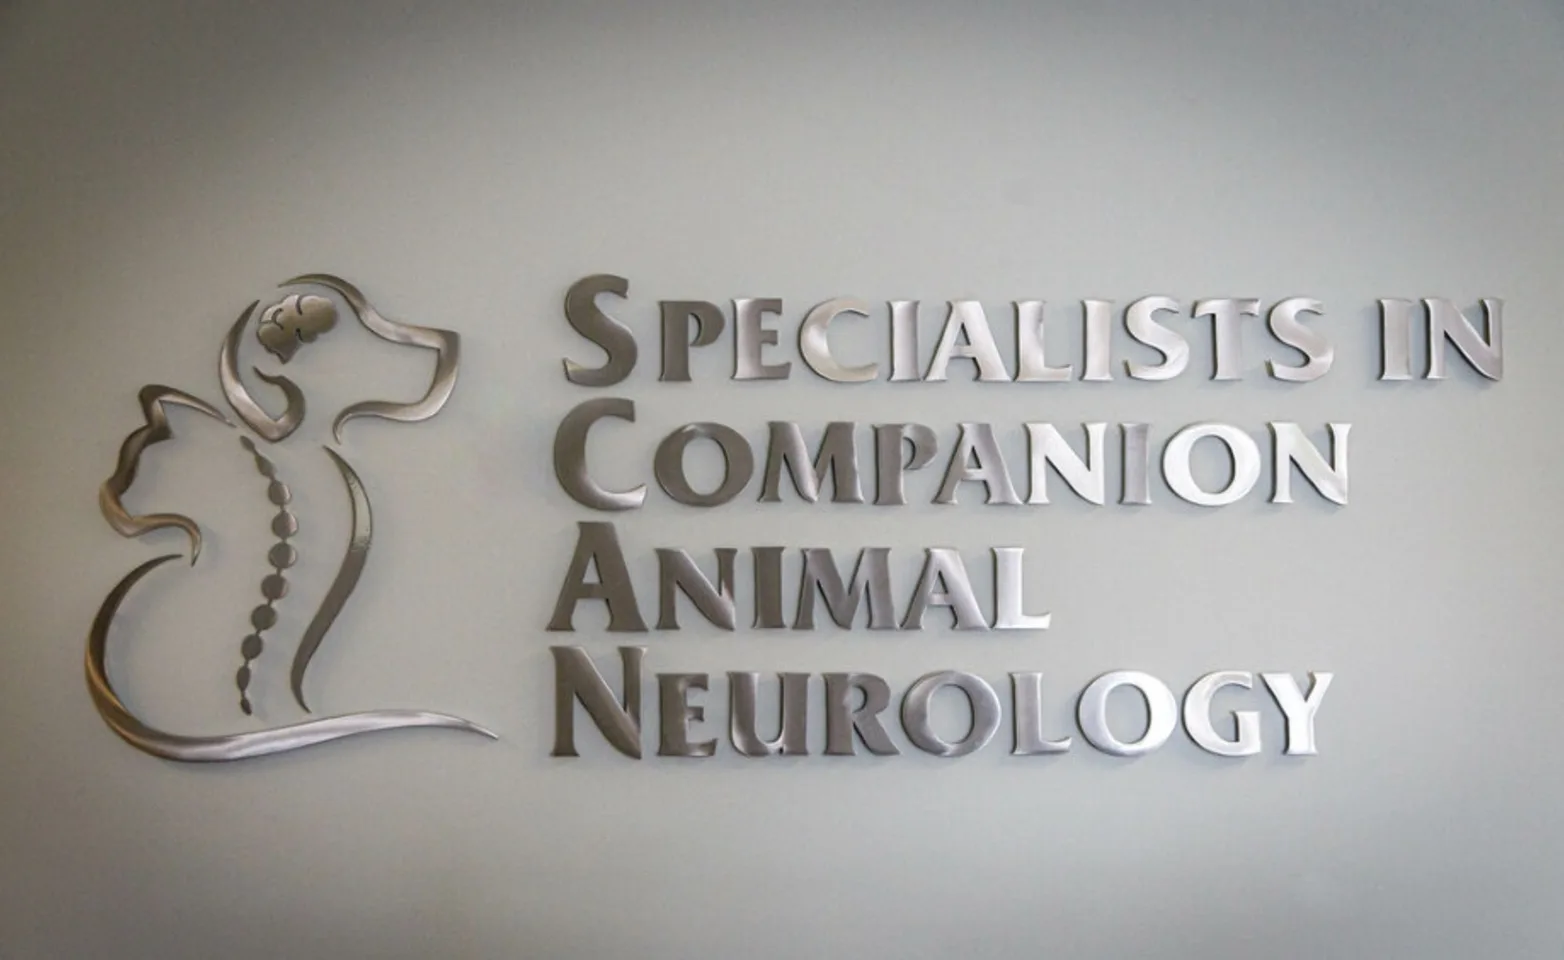 A metal cutout of the Specialists in Companion Animal Neurology (SCAN) logo hanging on a wall